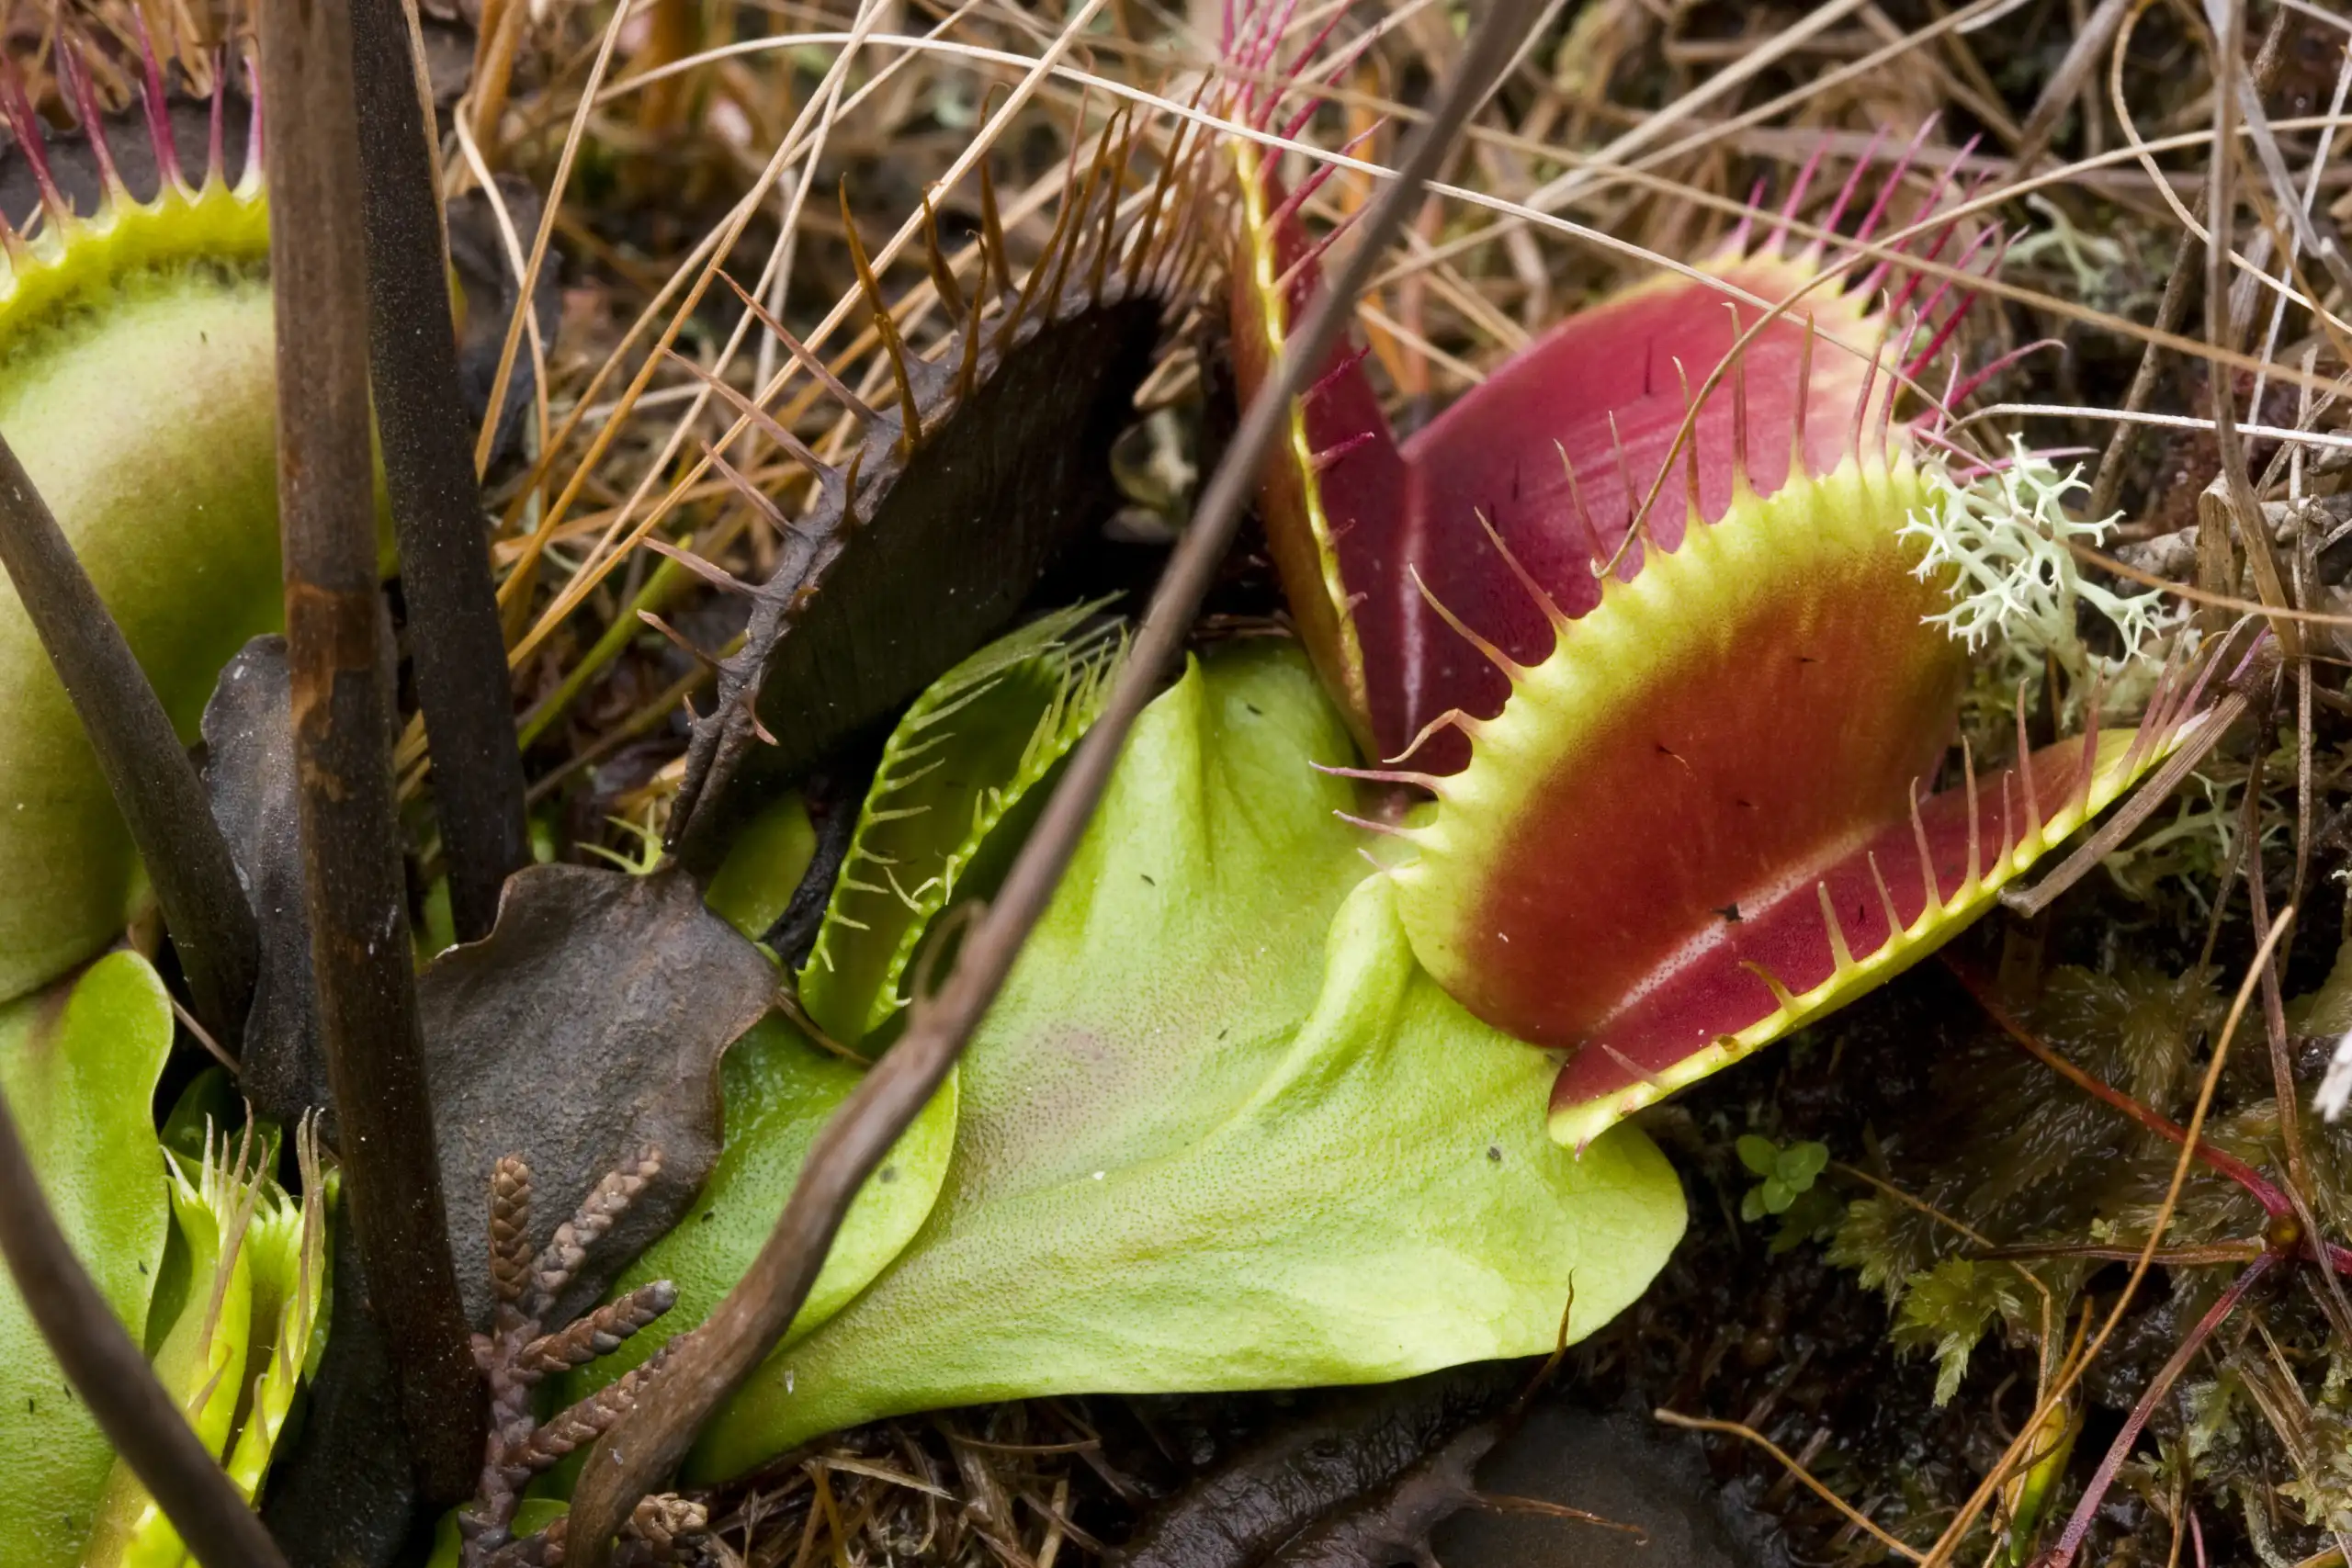 Introduced Dionaea muscipula plant growing in the Albion pygmy pine forest in Medocino, California.